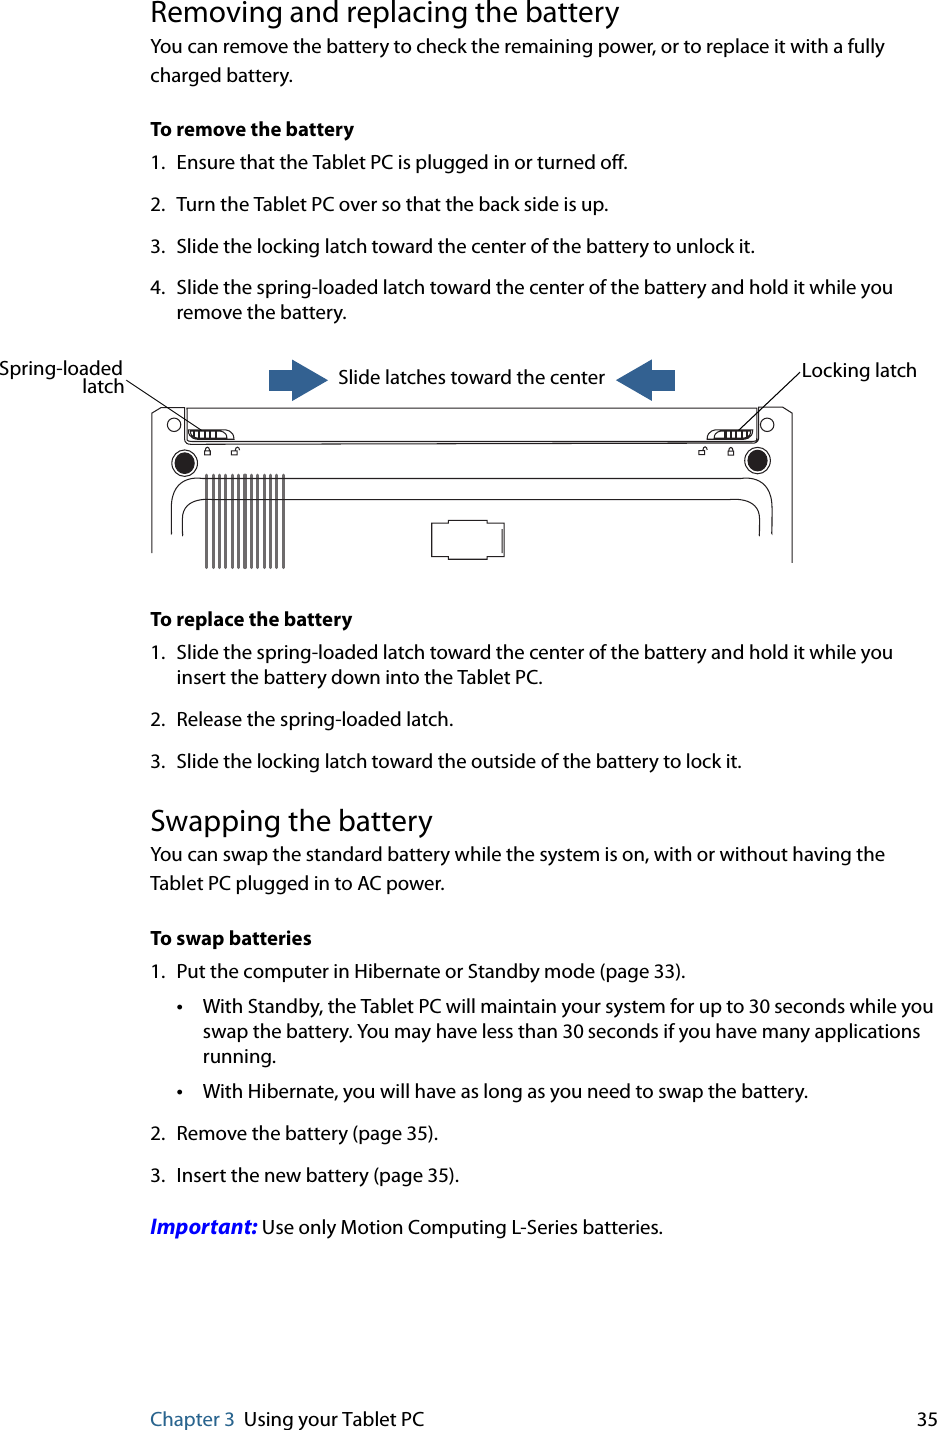 Chapter 3 Using your Tablet PC 35Removing and replacing the batteryYou can remove the battery to check the remaining power, or to replace it with a fully charged battery.To remove the battery1. Ensure that the Tablet PC is plugged in or turned off.2. Turn the Tablet PC over so that the back side is up.3. Slide the locking latch toward the center of the battery to unlock it.4. Slide the spring-loaded latch toward the center of the battery and hold it while you remove the battery.To replace the battery1. Slide the spring-loaded latch toward the center of the battery and hold it while you insert the battery down into the Tablet PC.2. Release the spring-loaded latch.3. Slide the locking latch toward the outside of the battery to lock it.Swapping the batteryYou can swap the standard battery while the system is on, with or without having the Tablet PC plugged in to AC power.To swap batteries1. Put the computer in Hibernate or Standby mode (page 33).•With Standby, the Tablet PC will maintain your system for up to 30 seconds while you swap the battery. You may have less than 30 seconds if you have many applications running.•With Hibernate, you will have as long as you need to swap the battery.2. Remove the battery (page 35).3. Insert the new battery (page 35).Important: Use only Motion Computing L-Series batteries.Locking latchSpring-loaded Slide latches toward the centerlatch